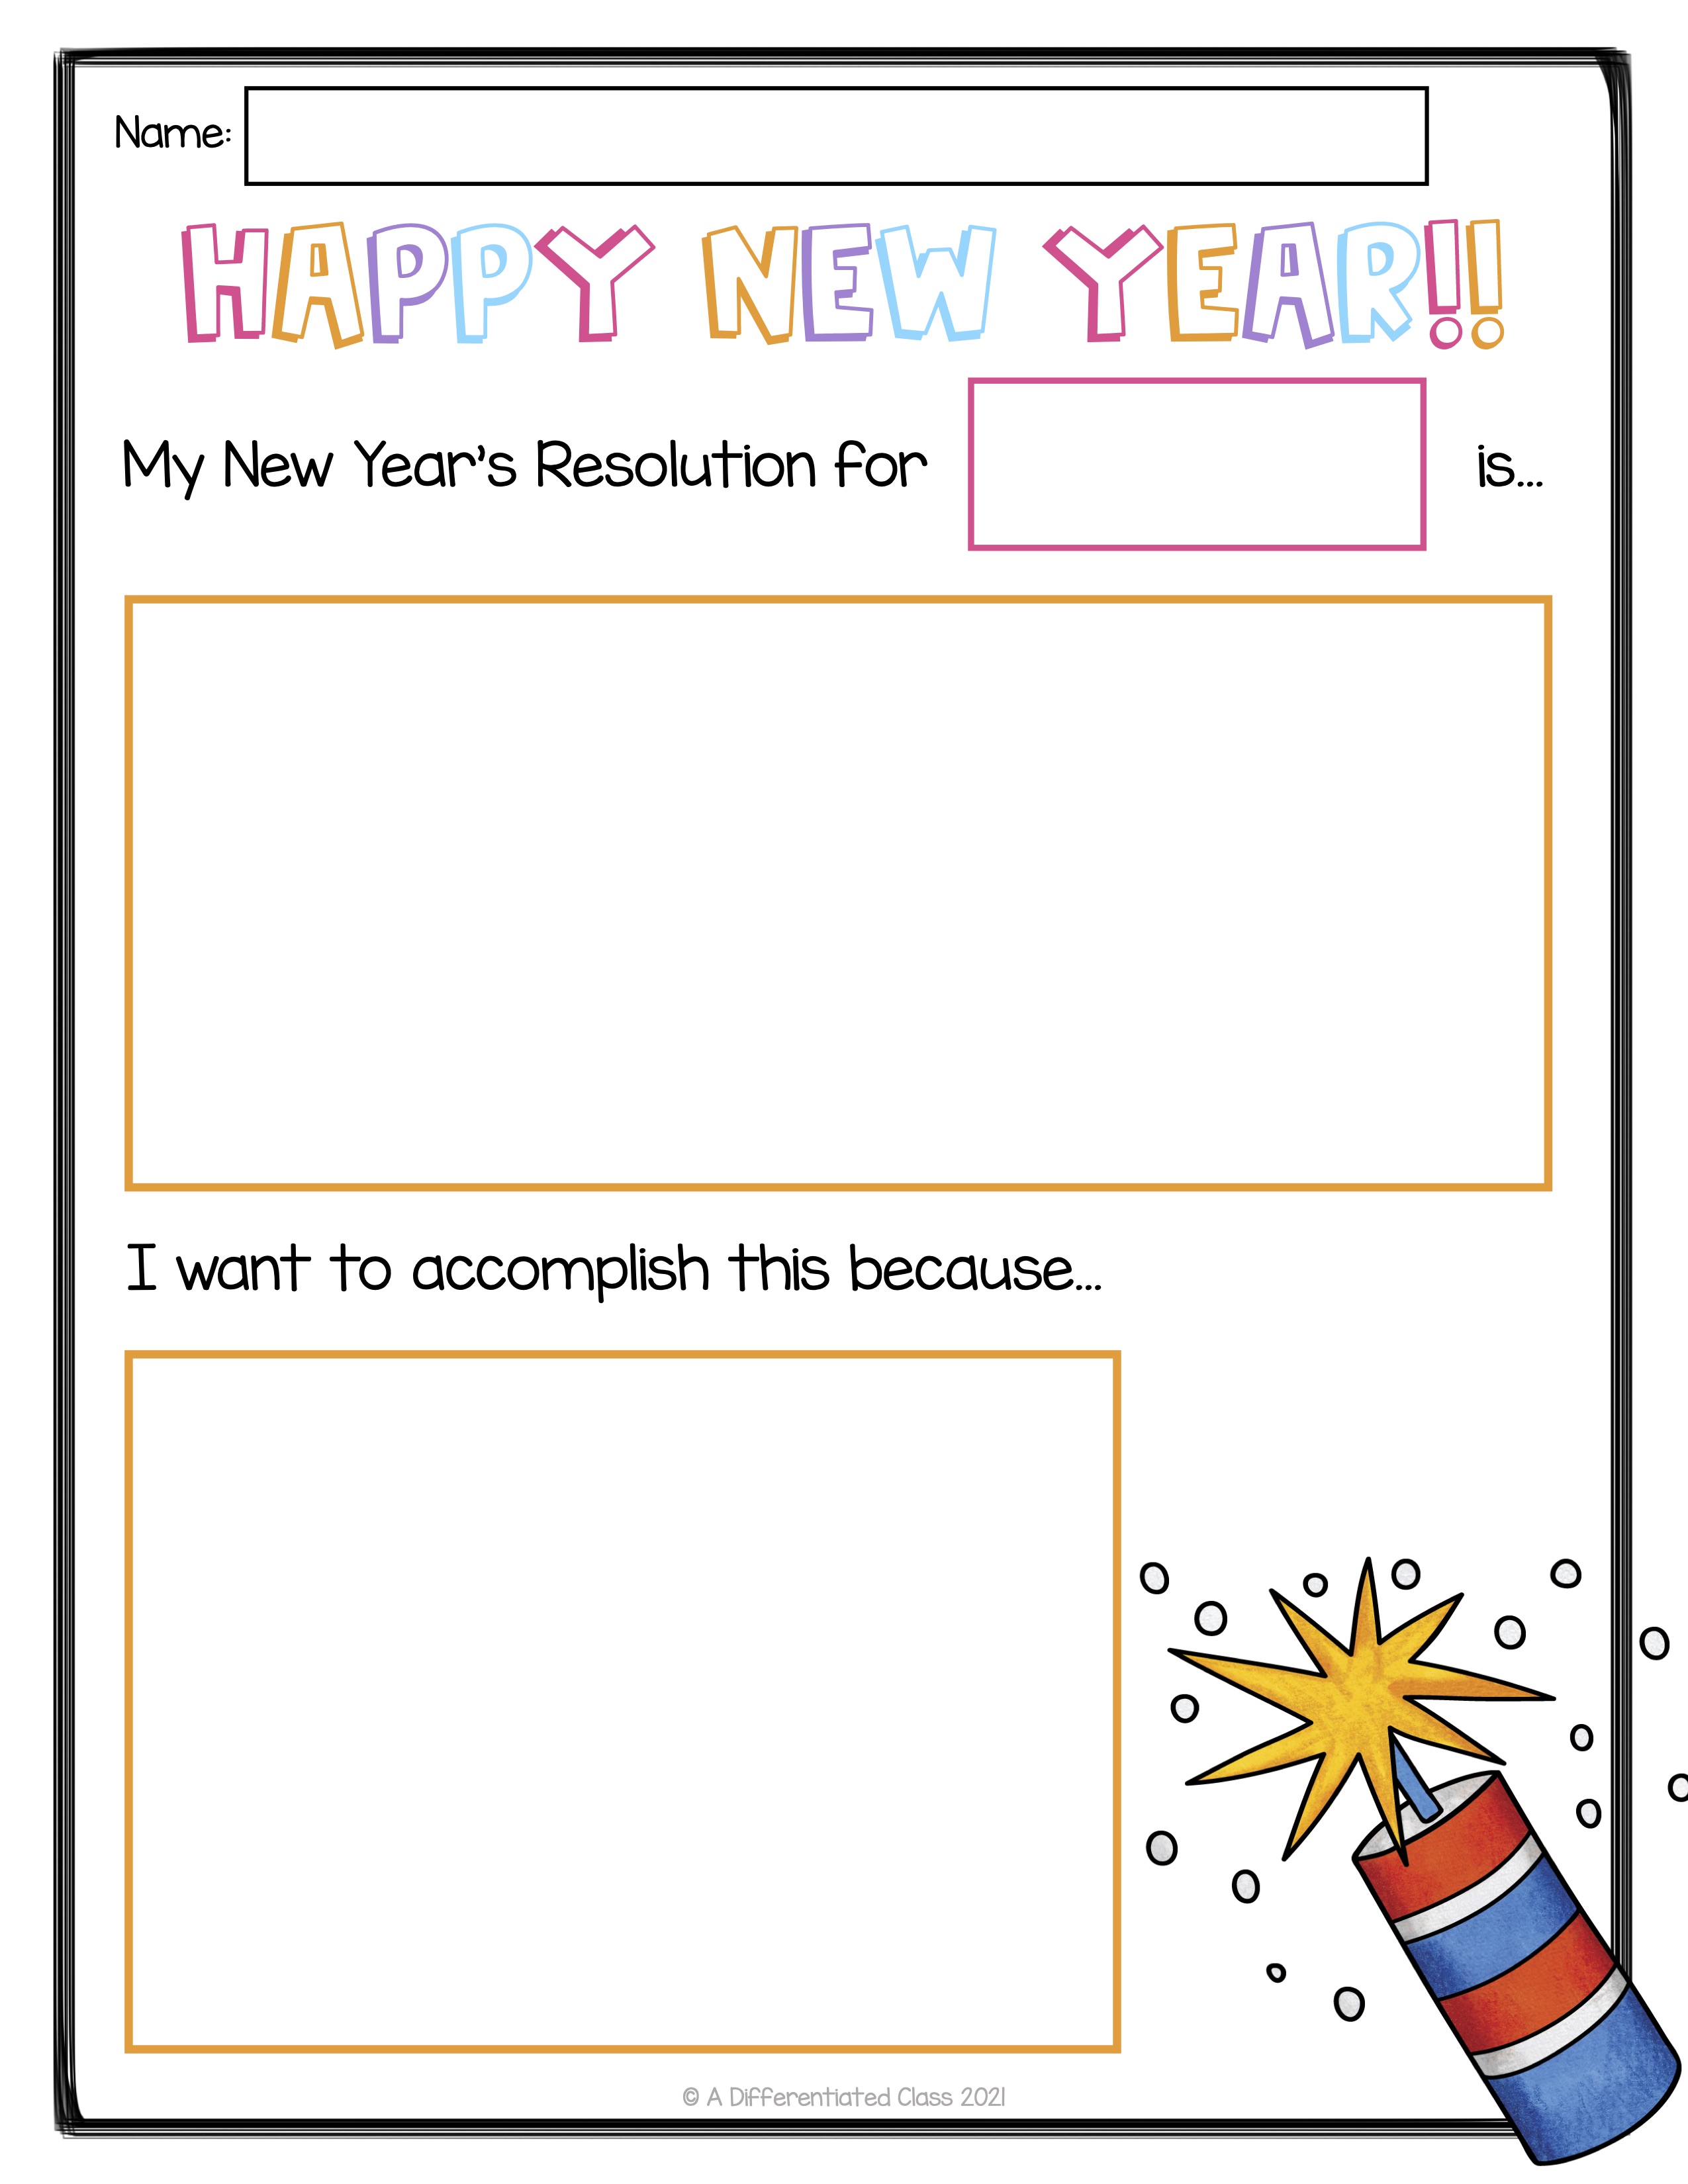 image of digital version of new year resolution for students activity